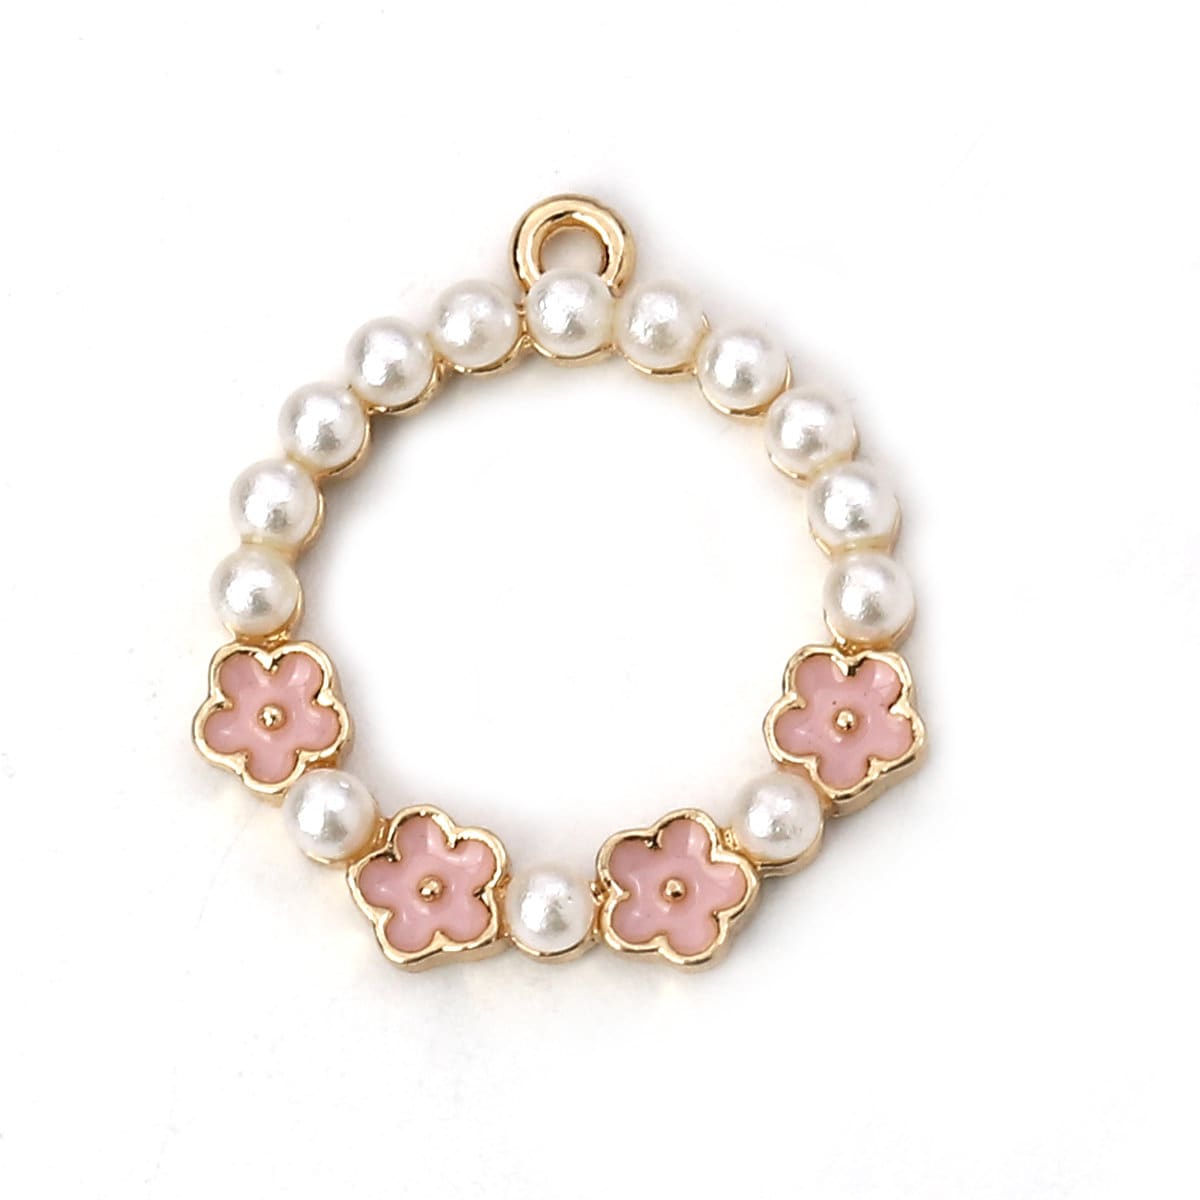 5pc Circle Ring with Pearls and Flowers Enamel Charm (22mm x20mm, Hole: 1.3mm)